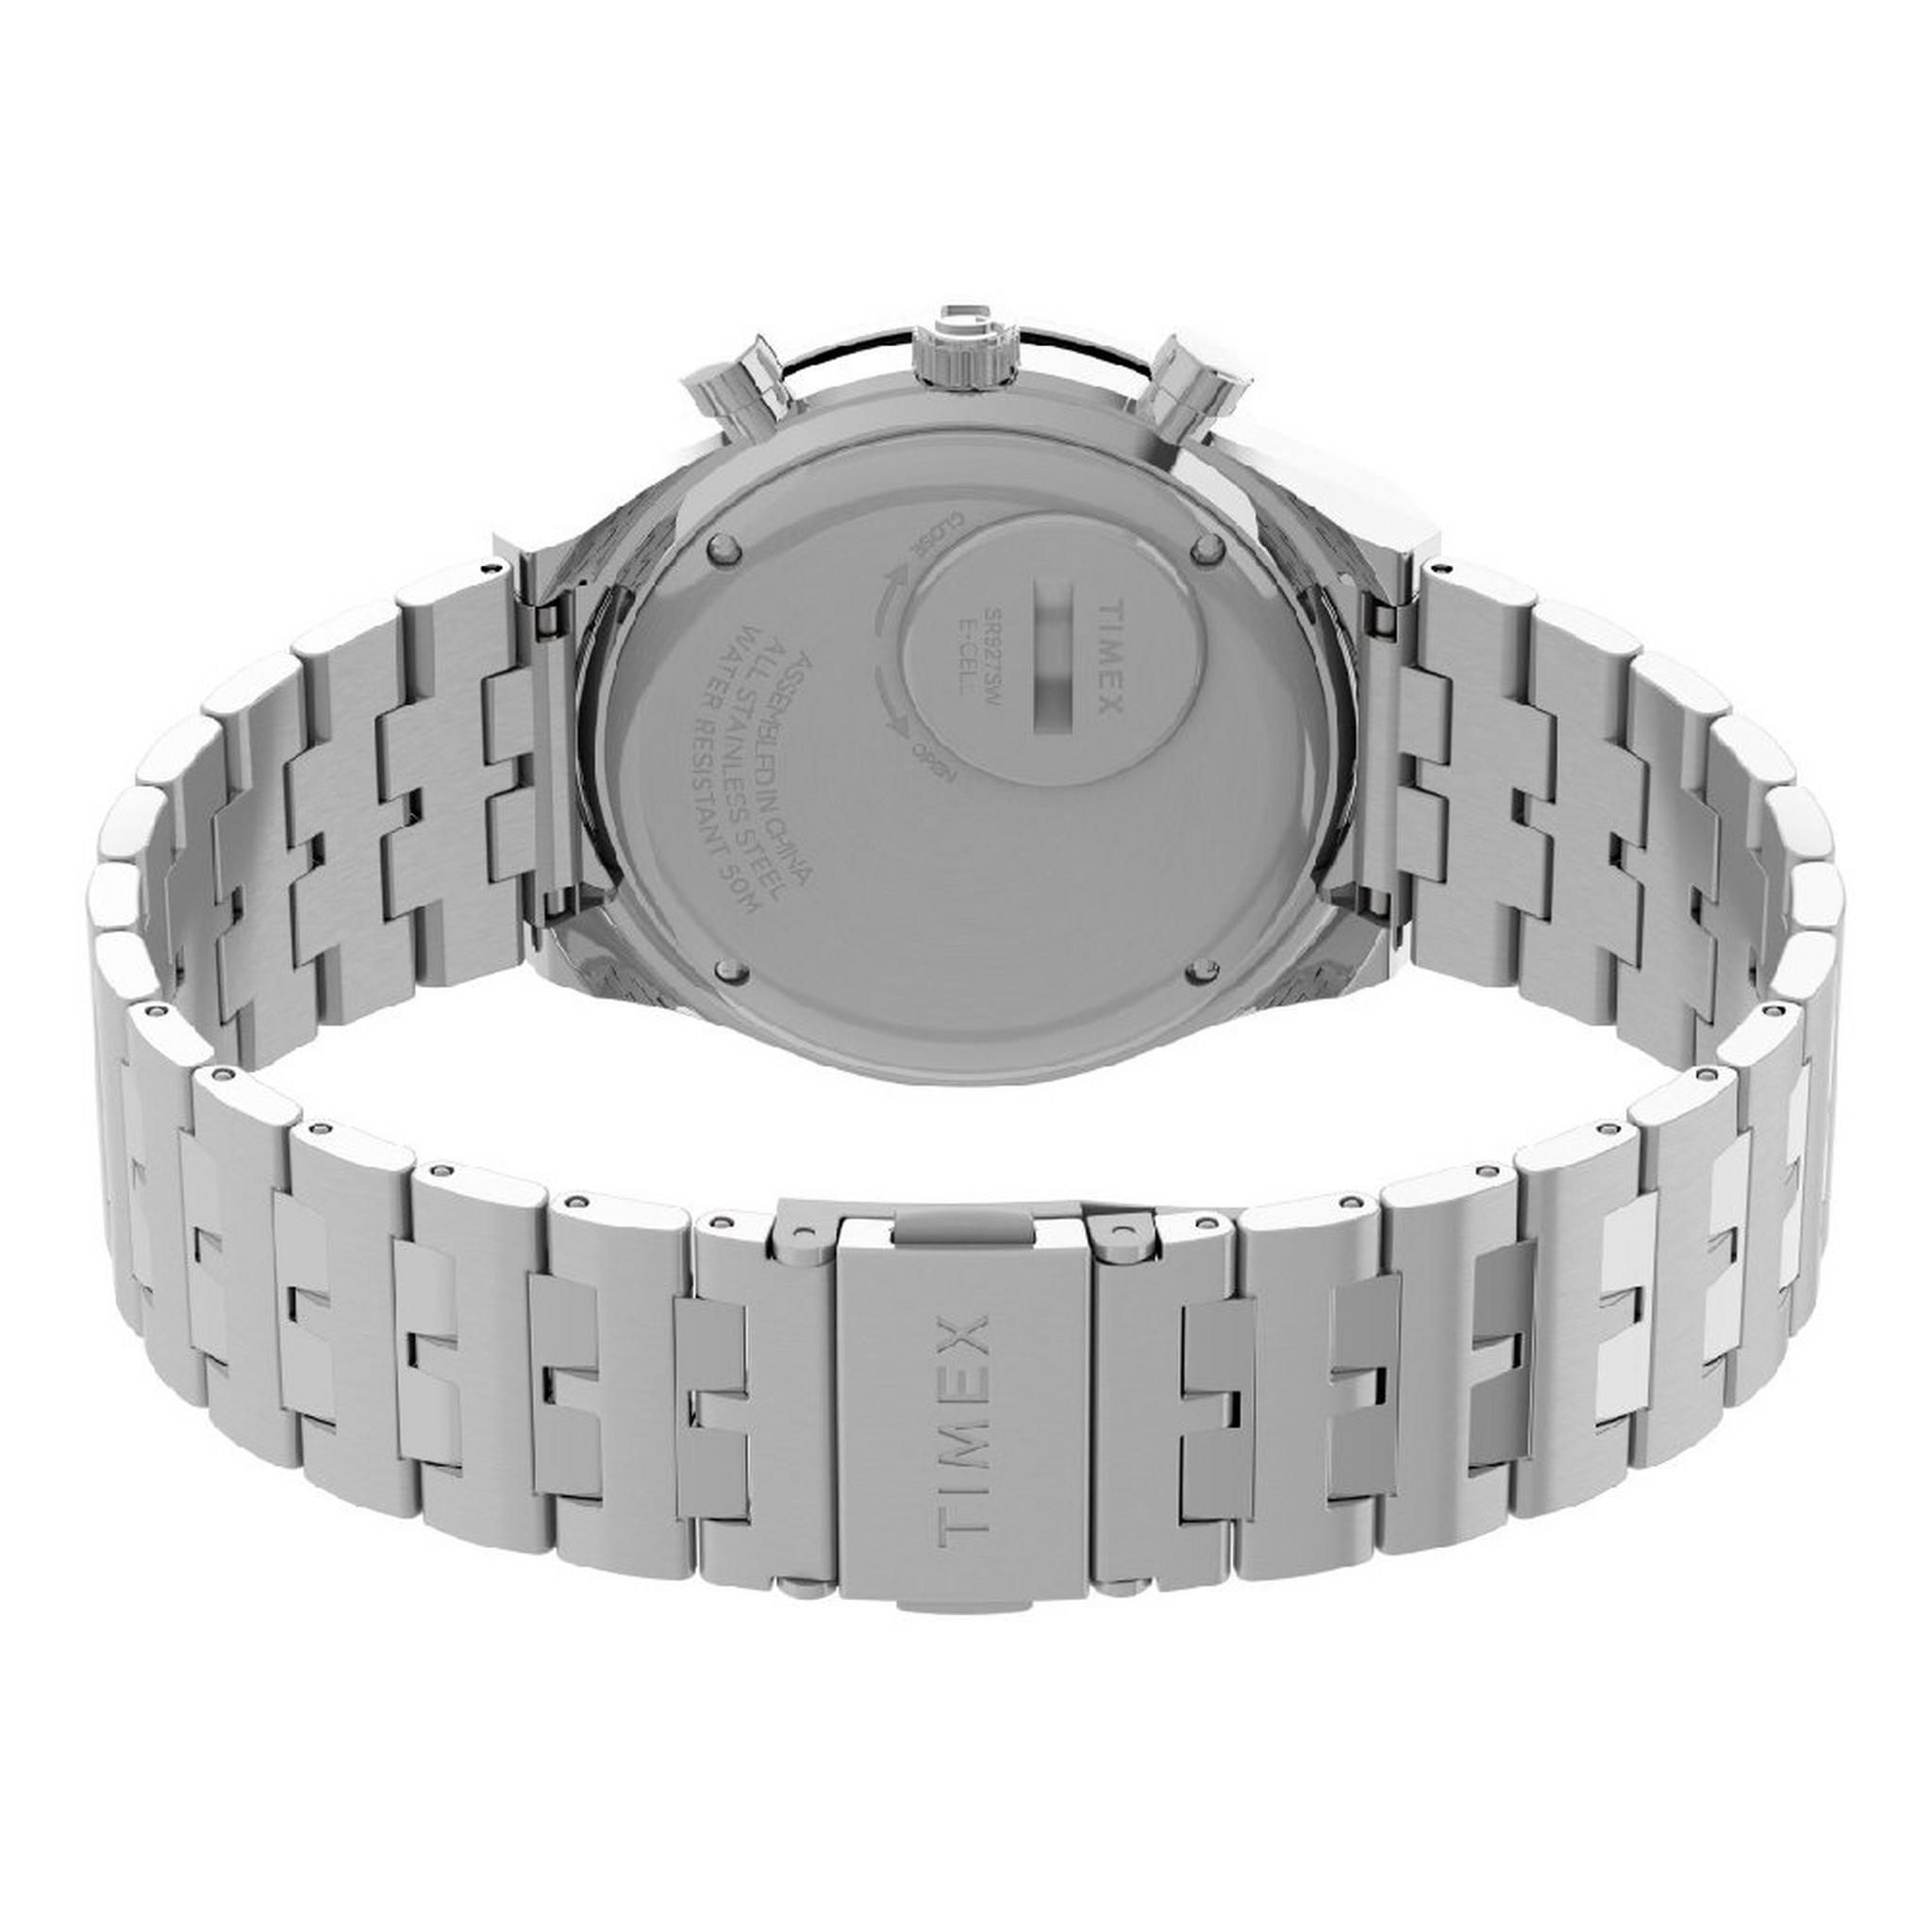 TIMEX Special Project Watch for Men, Digital, 40mm, Stainless Steel Strap, TW2V42600 -Silver